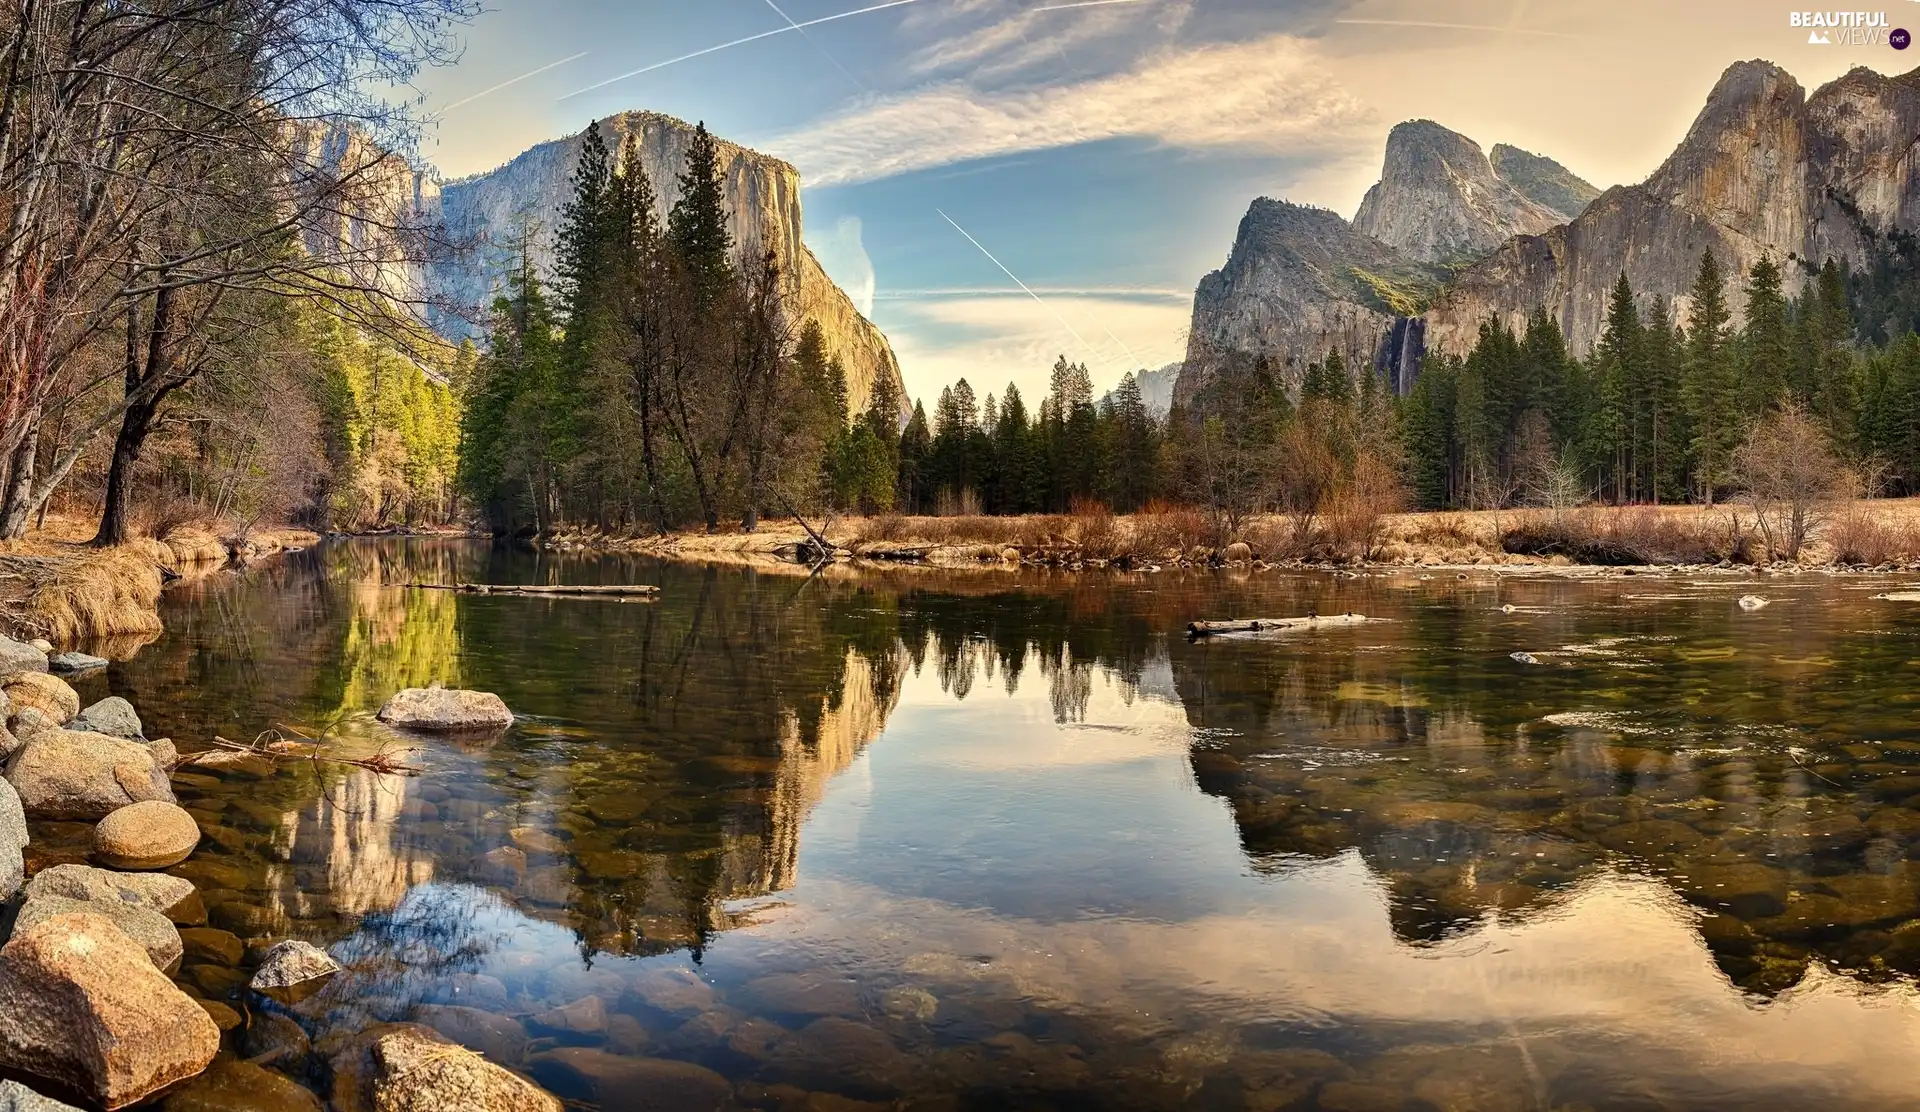 Stones, Mountains, viewes, reflection, trees, lake